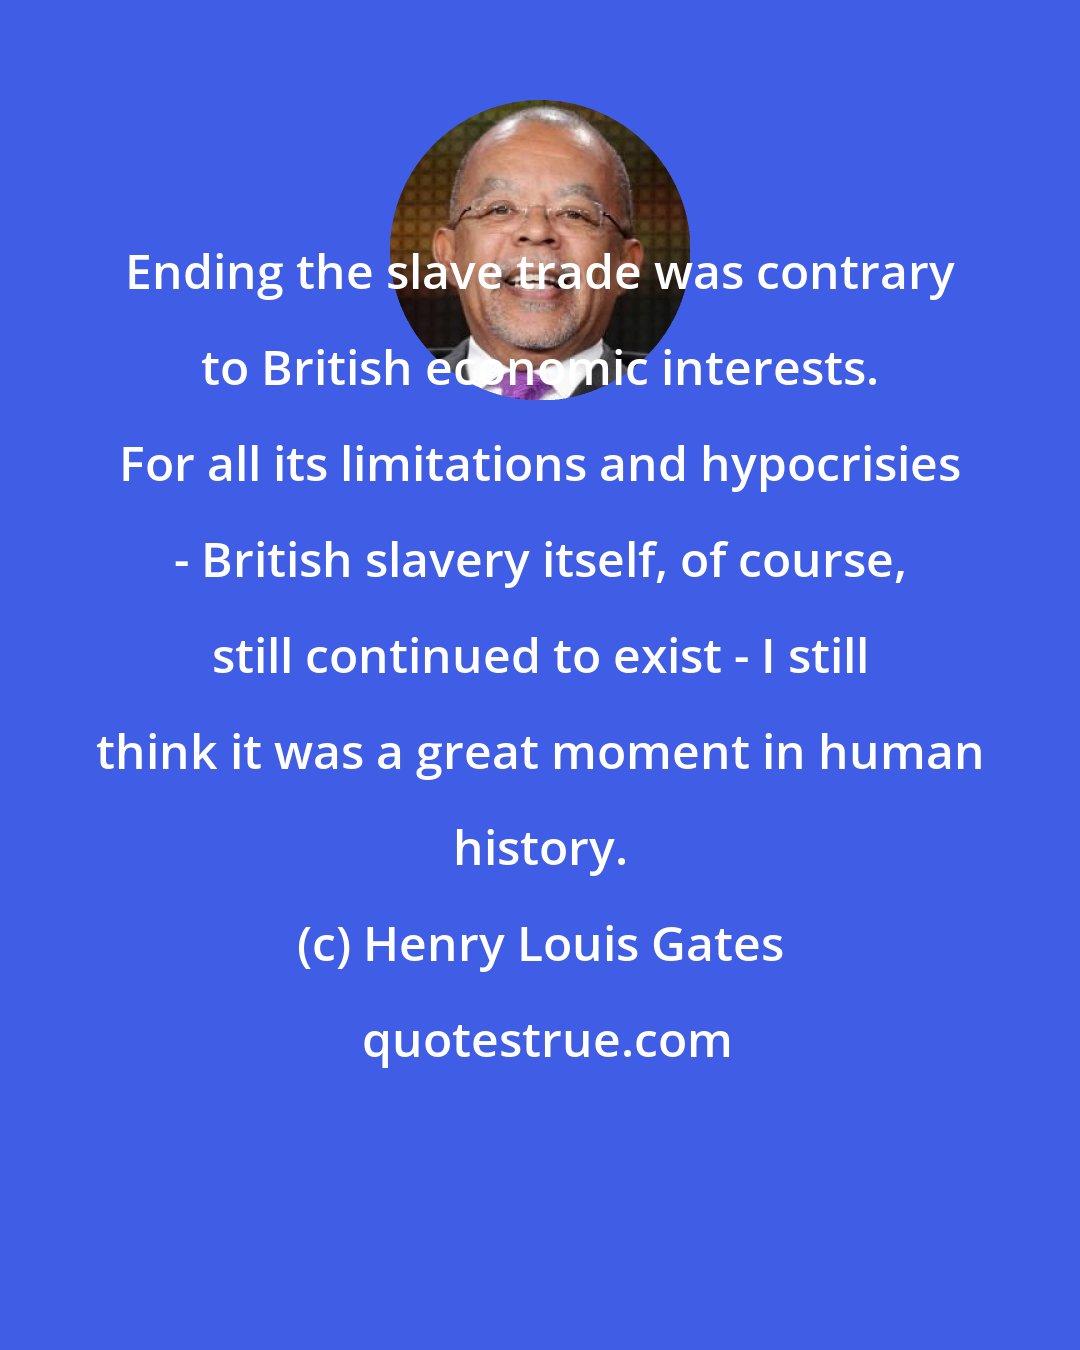 Henry Louis Gates: Ending the slave trade was contrary to British economic interests. For all its limitations and hypocrisies - British slavery itself, of course, still continued to exist - I still think it was a great moment in human history.